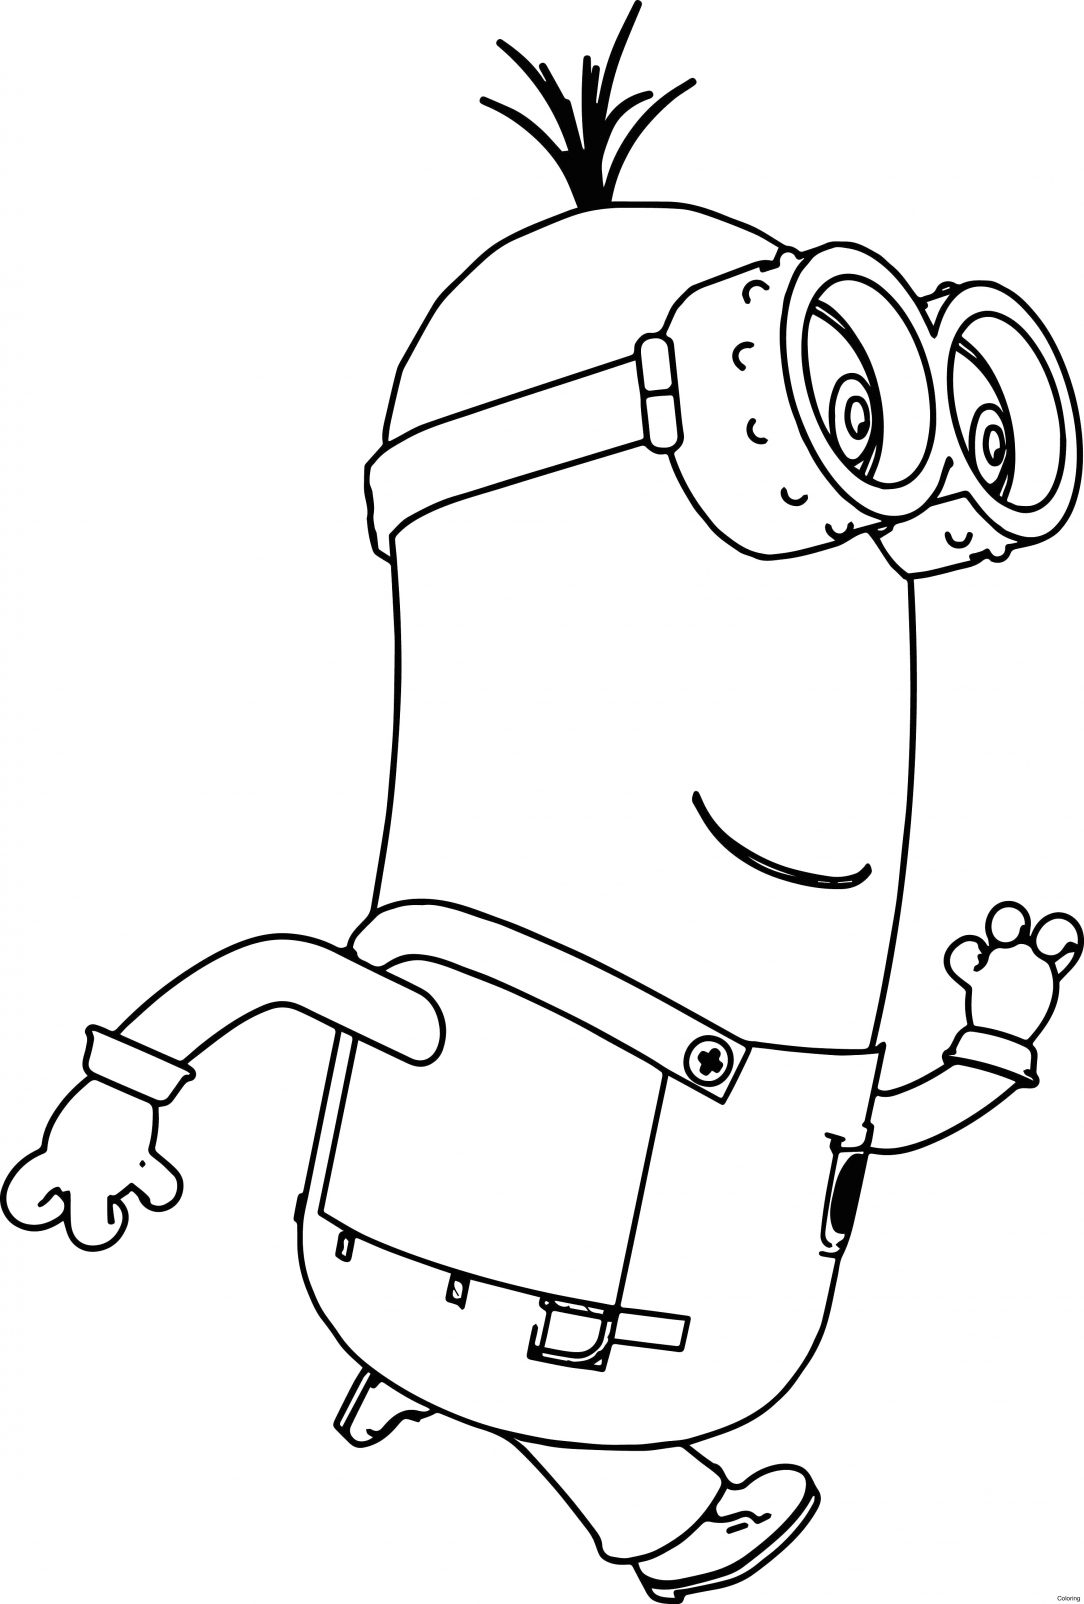 Giant Coloring Pages For Adults Coloring Book Ideas Bob The Minion Coloringges Book Free Giant